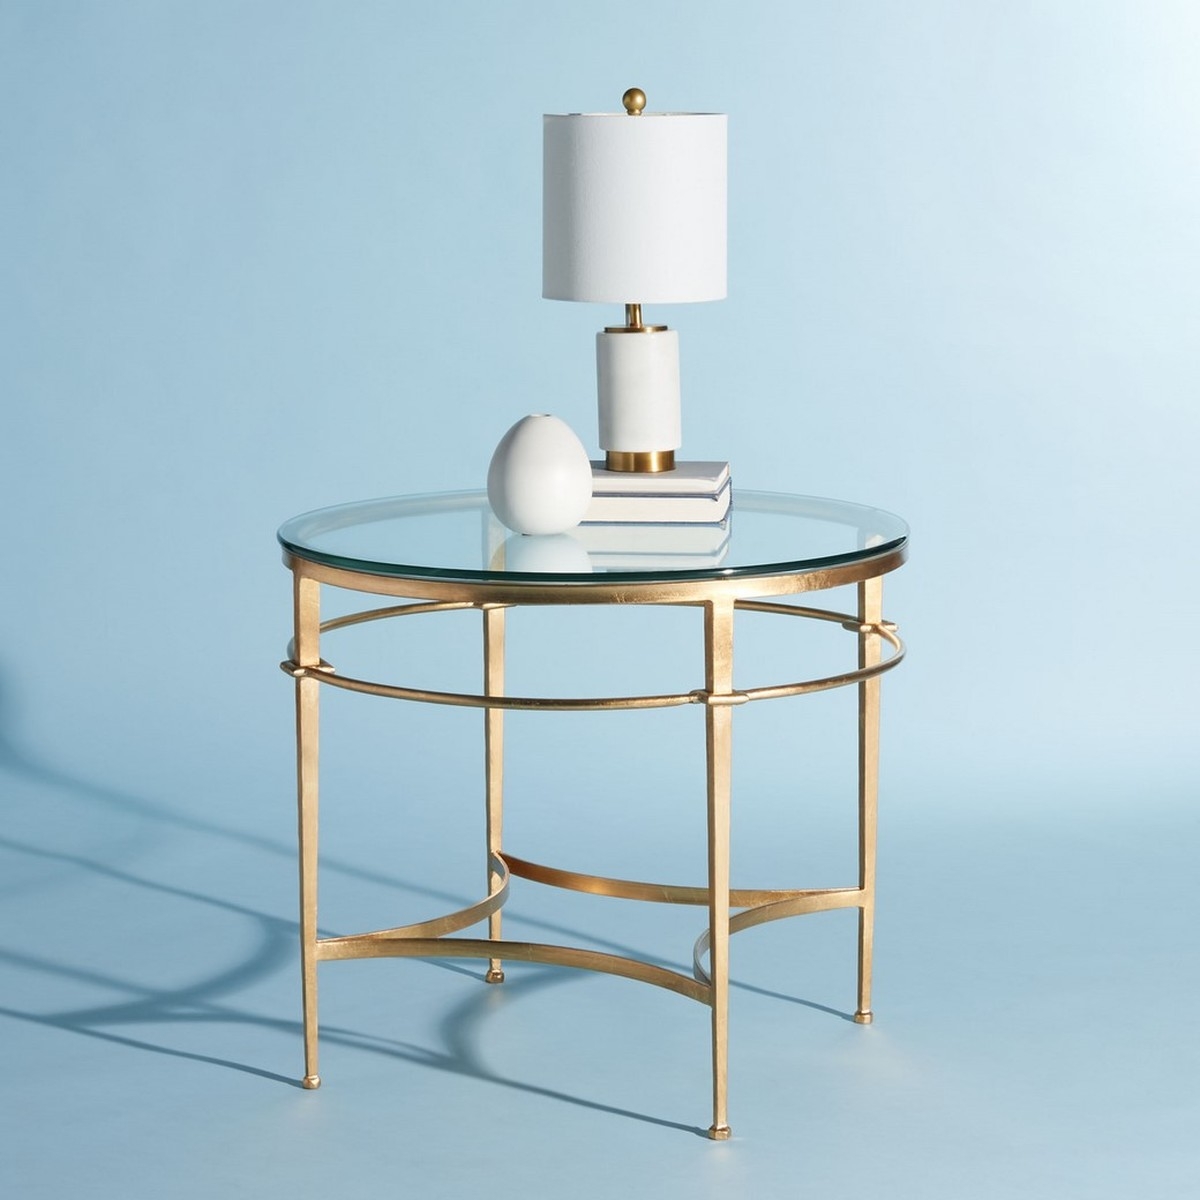 Ingmar Round Glass Side Table - Gold - Arlo Home - Image 2